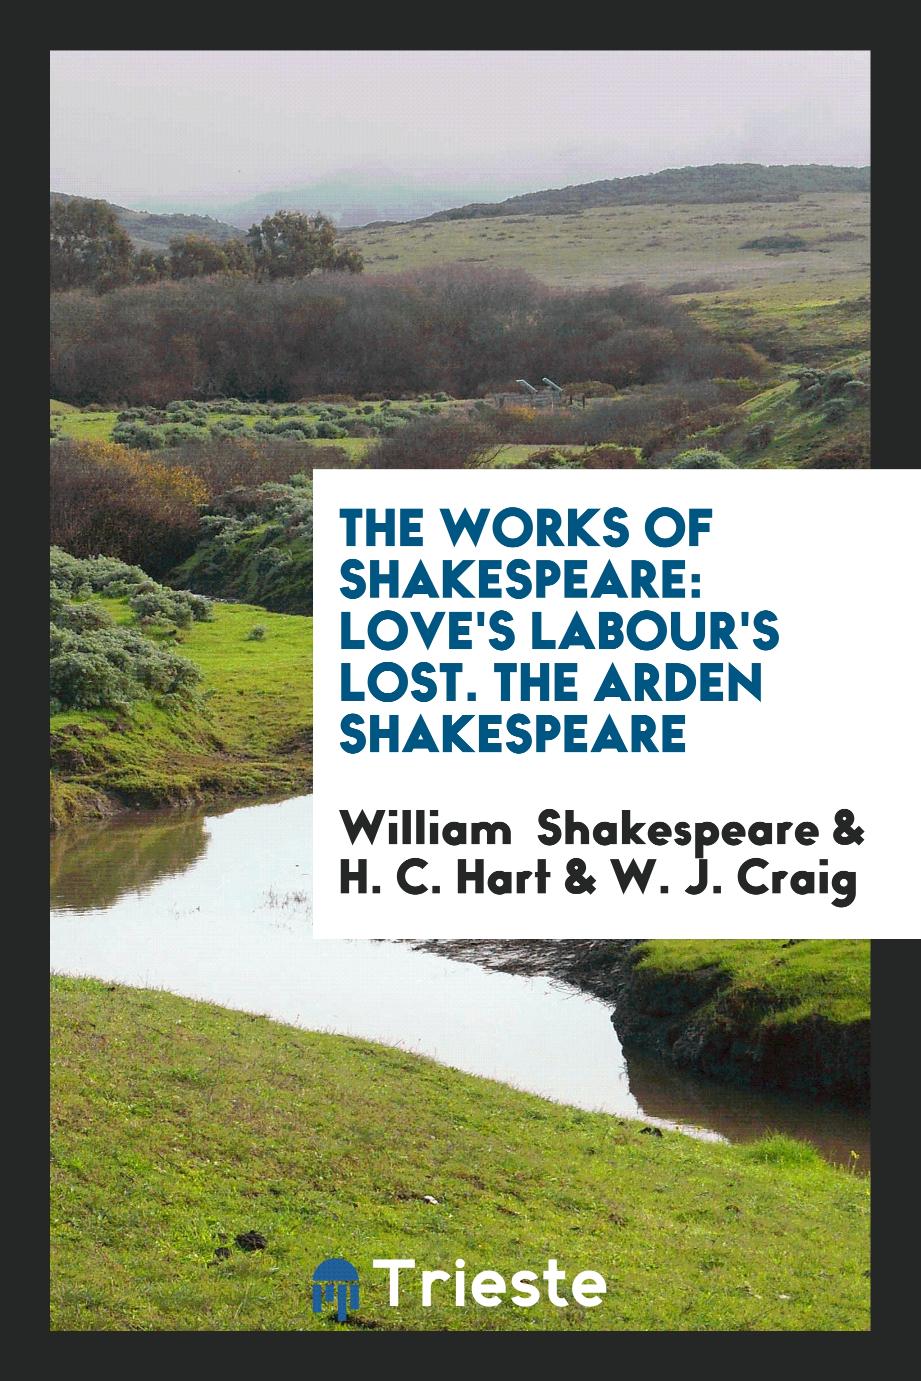 The Works of Shakespeare: Love's Labour's Lost. The Arden Shakespeare